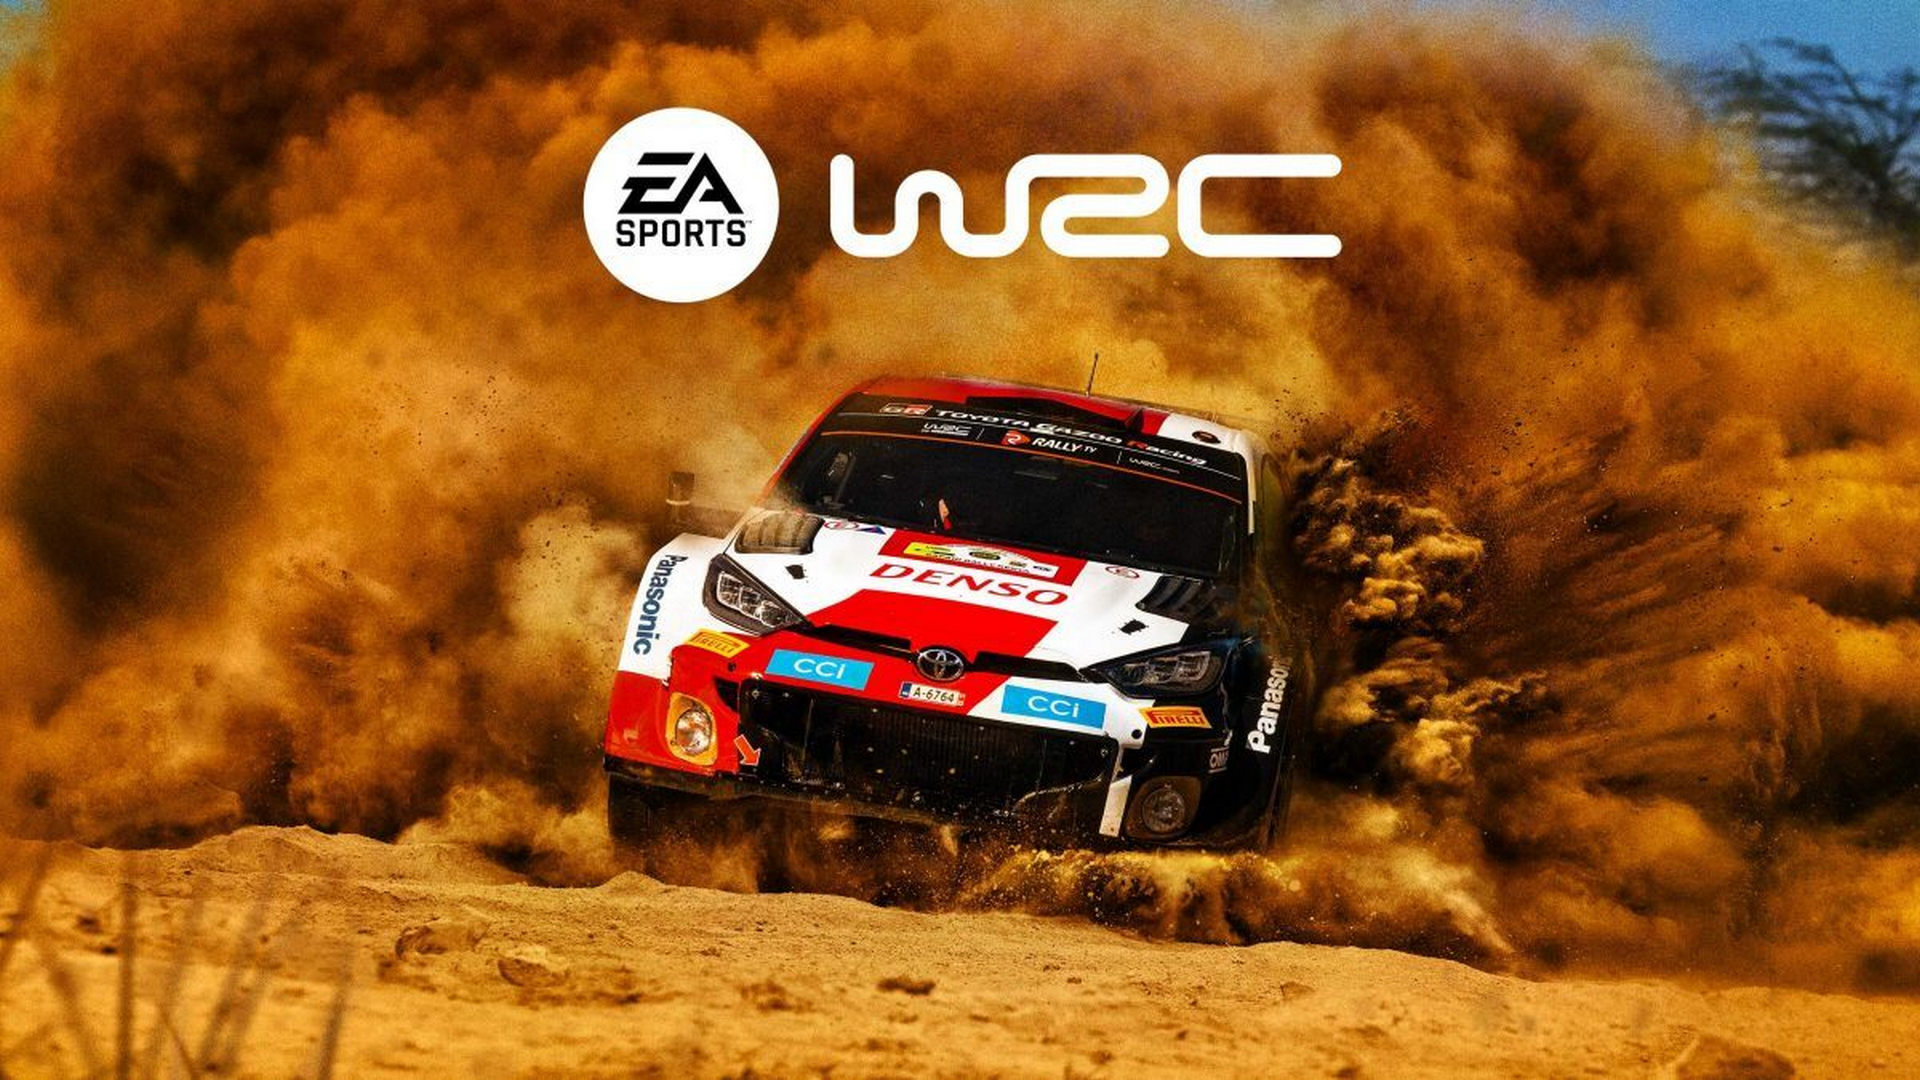 First Look At EA SPORTS WRC Gameplay